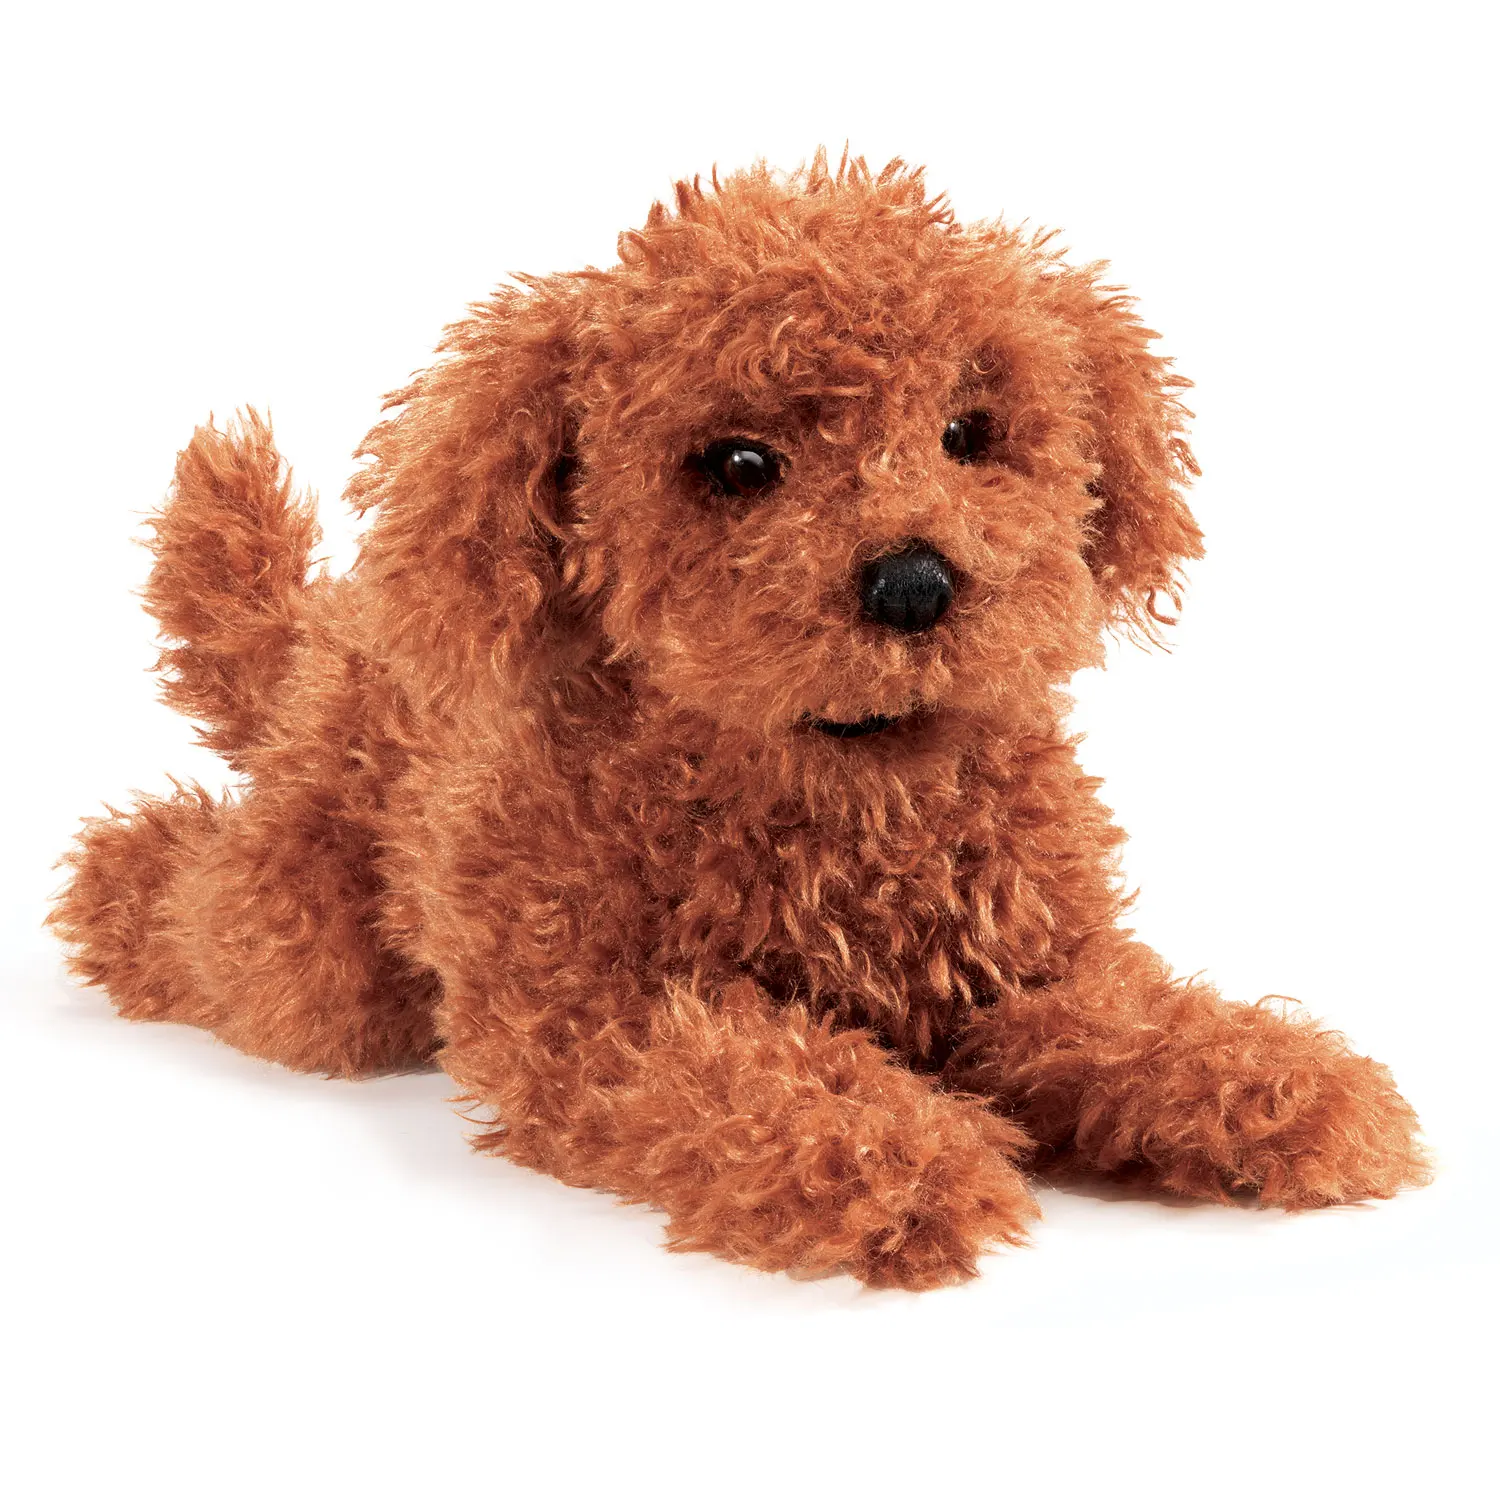 Pudelwelpe / Toy Poodle